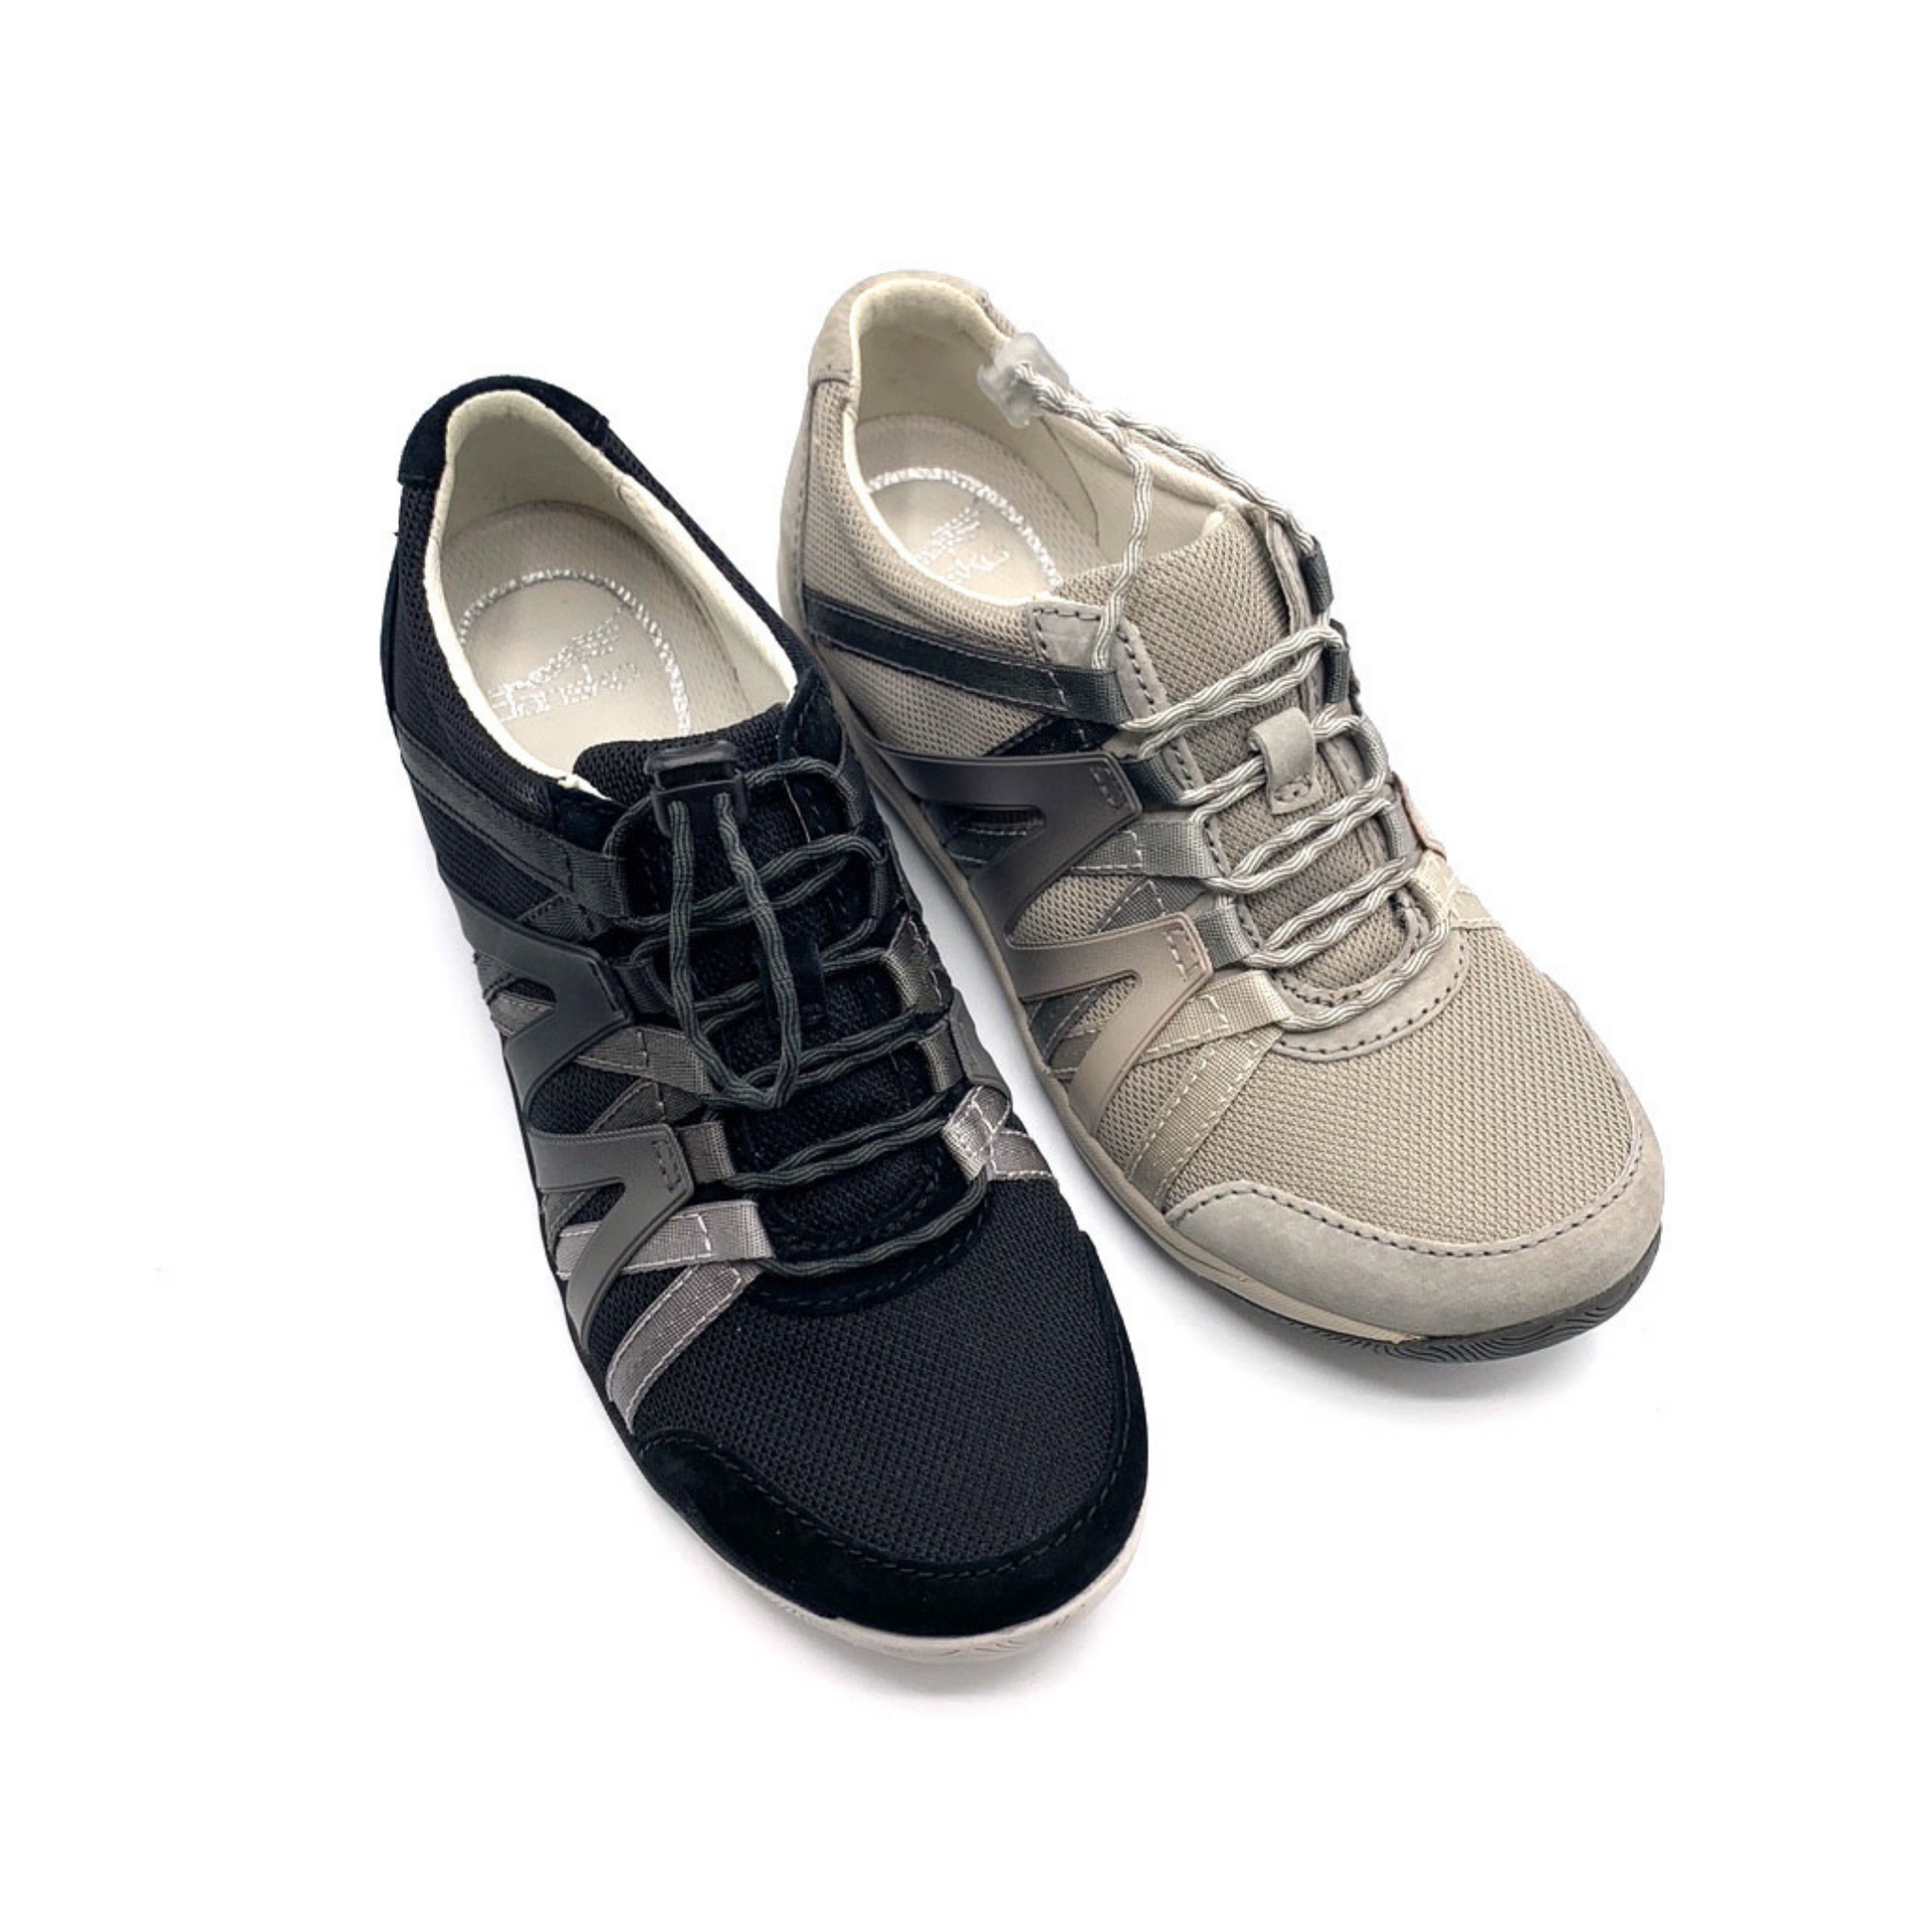 Two sneakers, one black and the other warm grey, viewed from a 45 degree angle. Both shoes have a mesh top, suede detailing, and an Ombre zig-zagged side pattern.